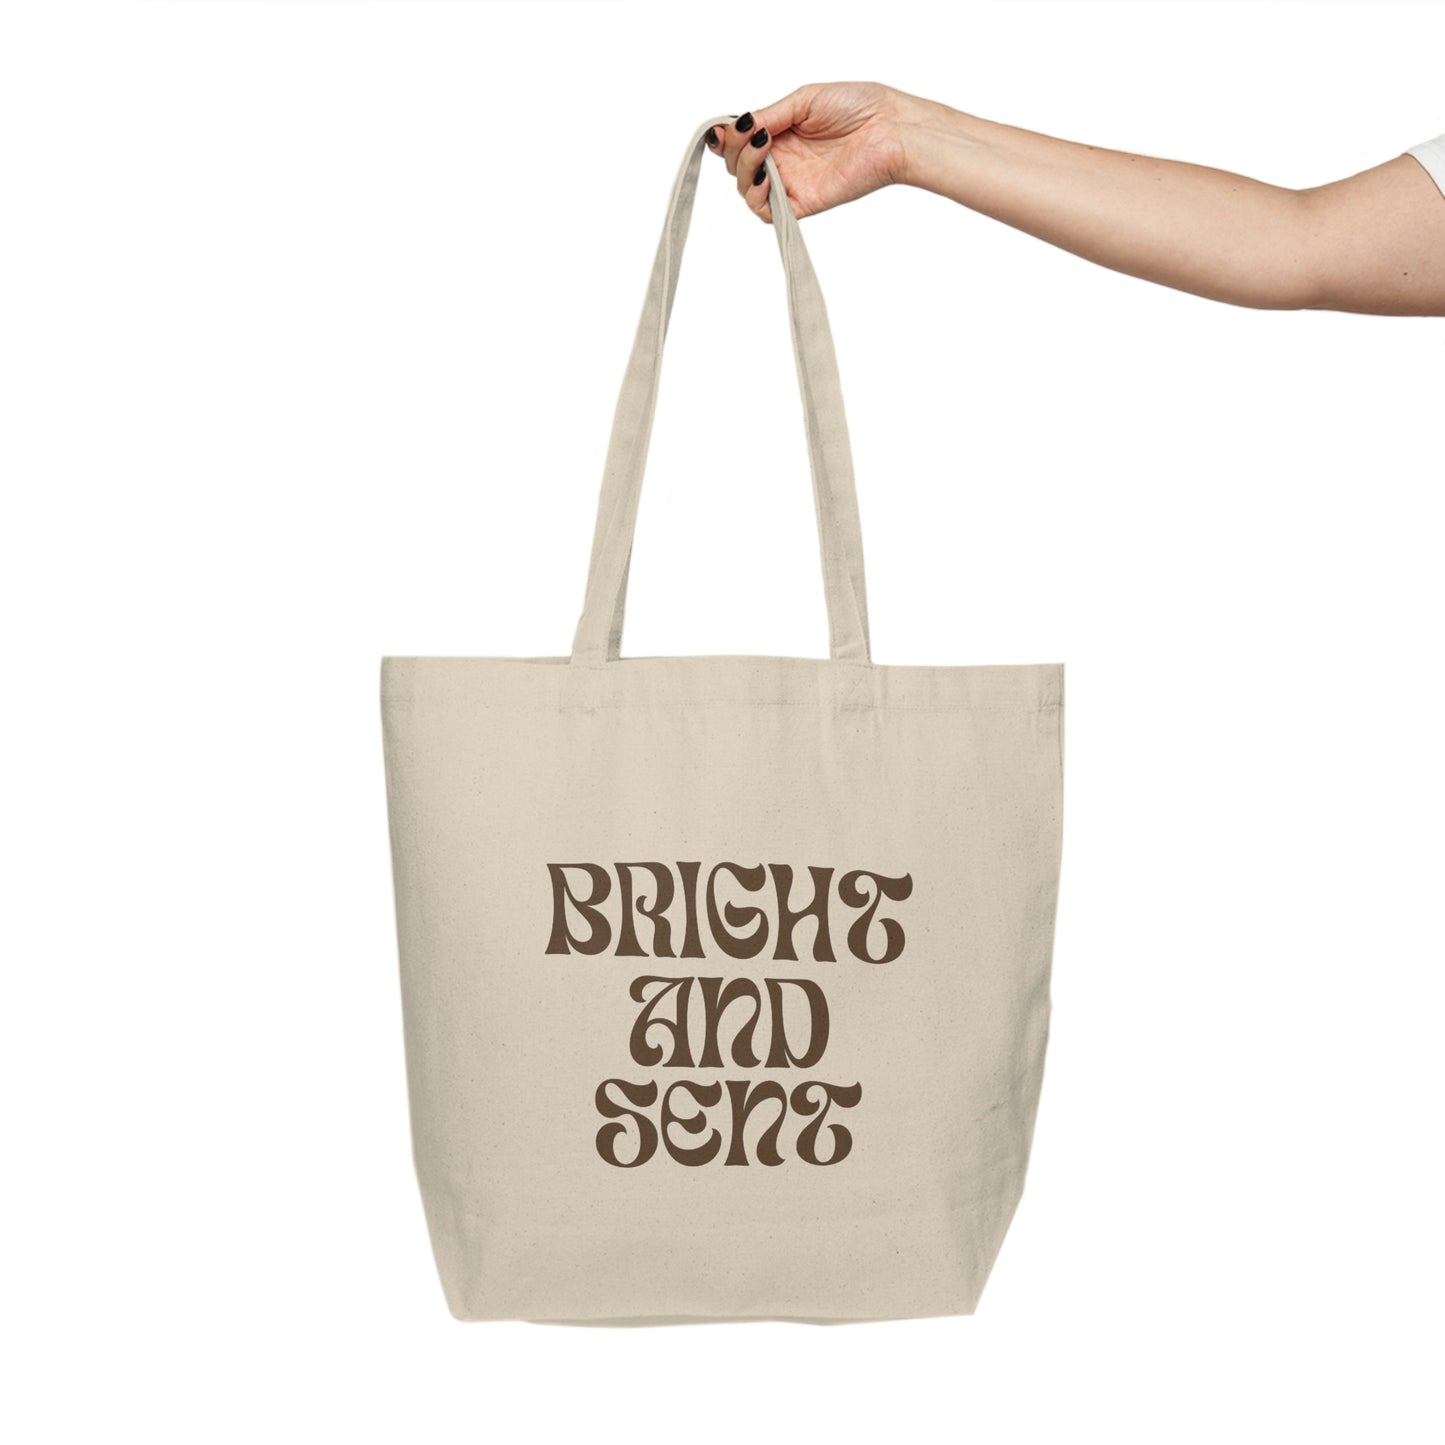 The Bright and Sent Tote